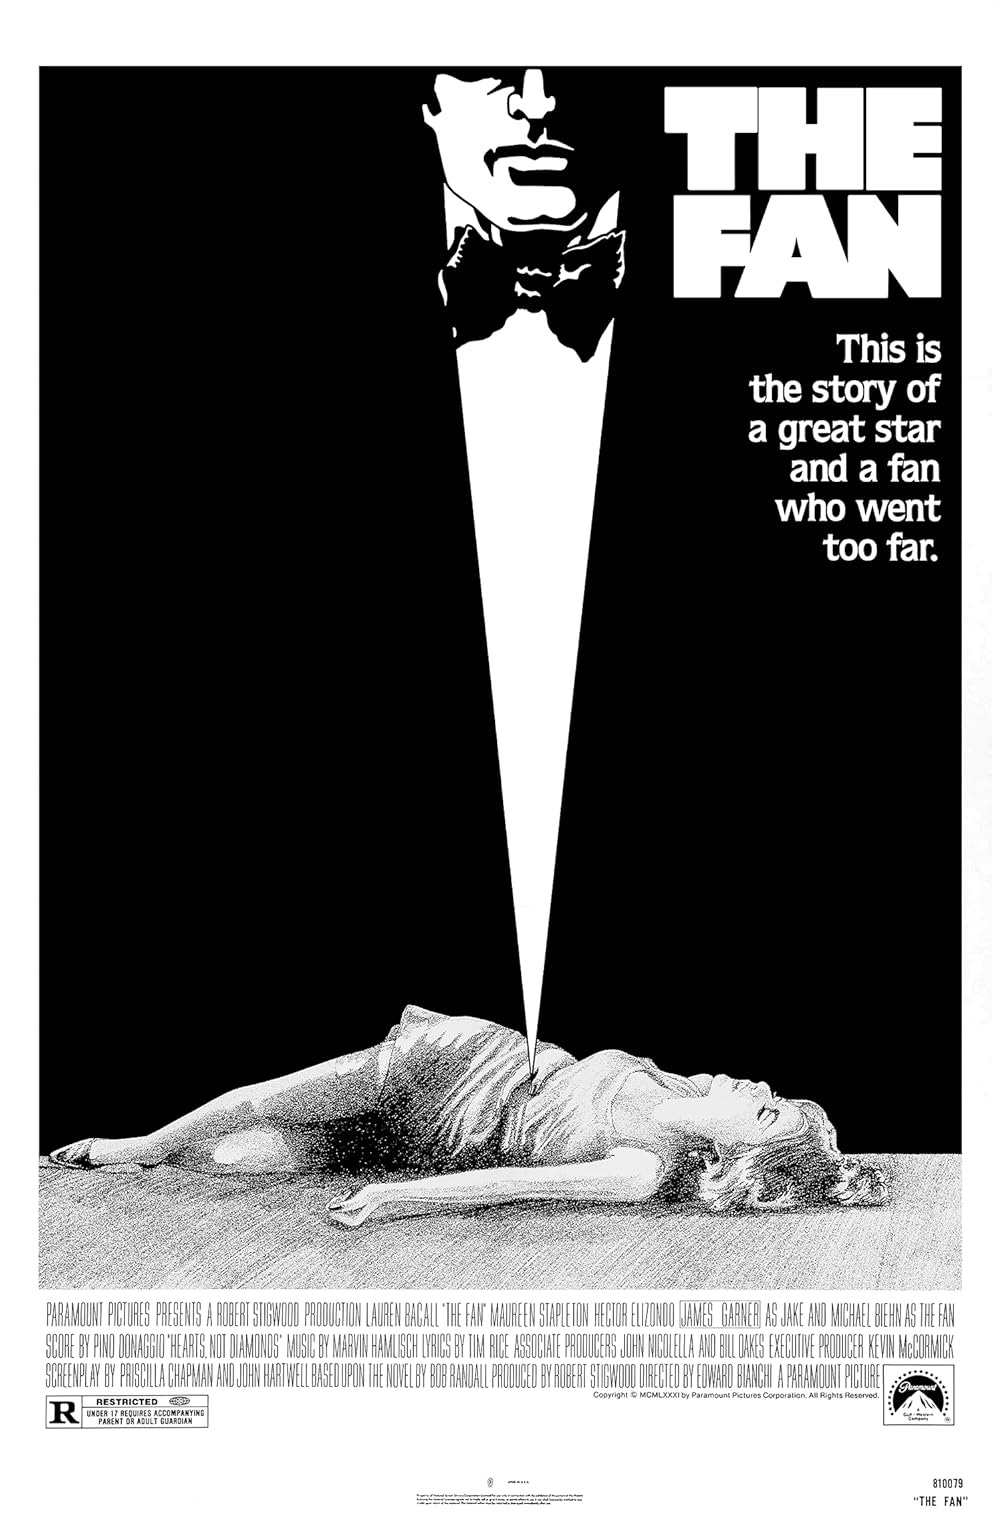 Poster for The Fan, featuring an illustration of a man's tie stabbing into a woman lying dead on the ground. Text reads "This is the story of a great star and a fan who went too far"